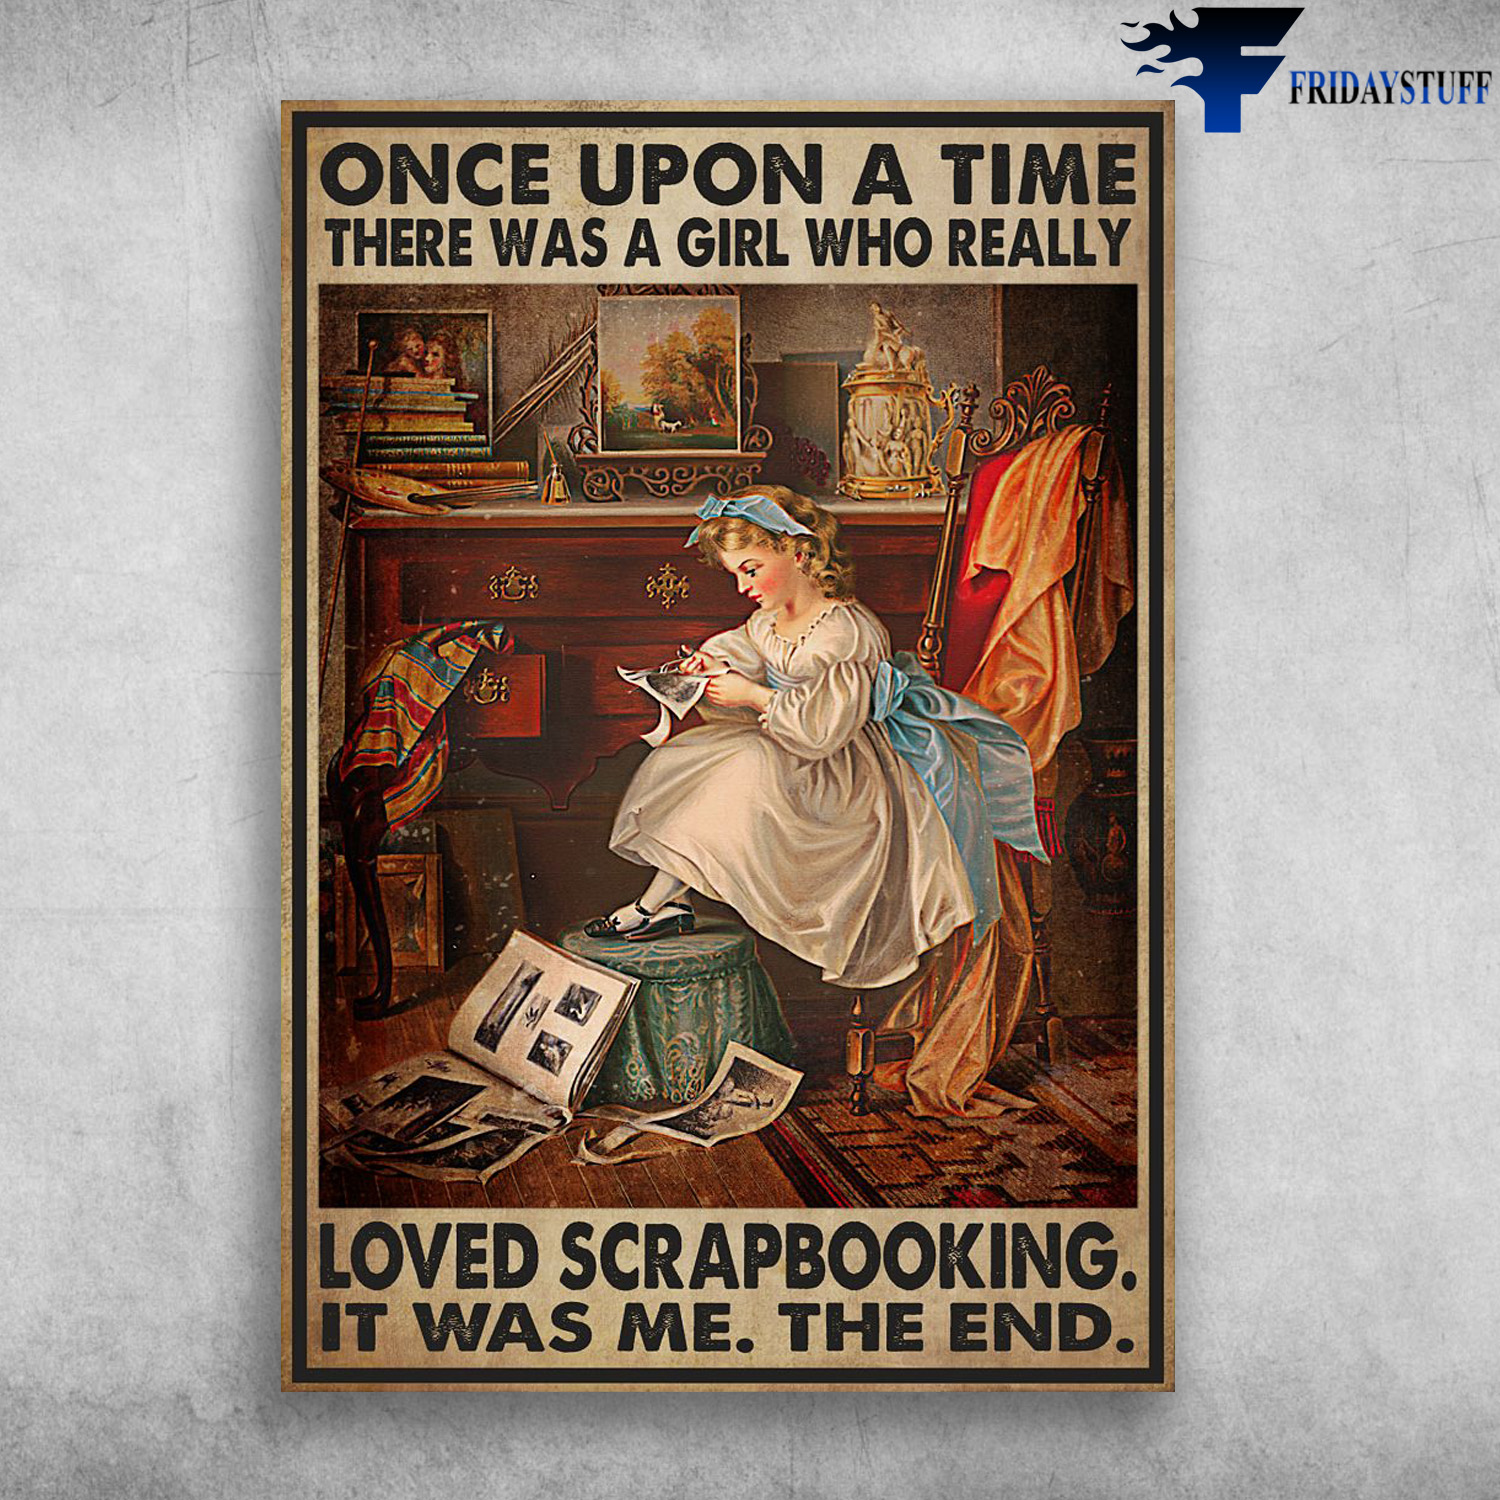 Little Girl Loves Scrapbooking - Once Upon A Time, There Was A Girl, Who Really Loved Scrapbooking, It Was Me, The End, Scrapbooking Lover